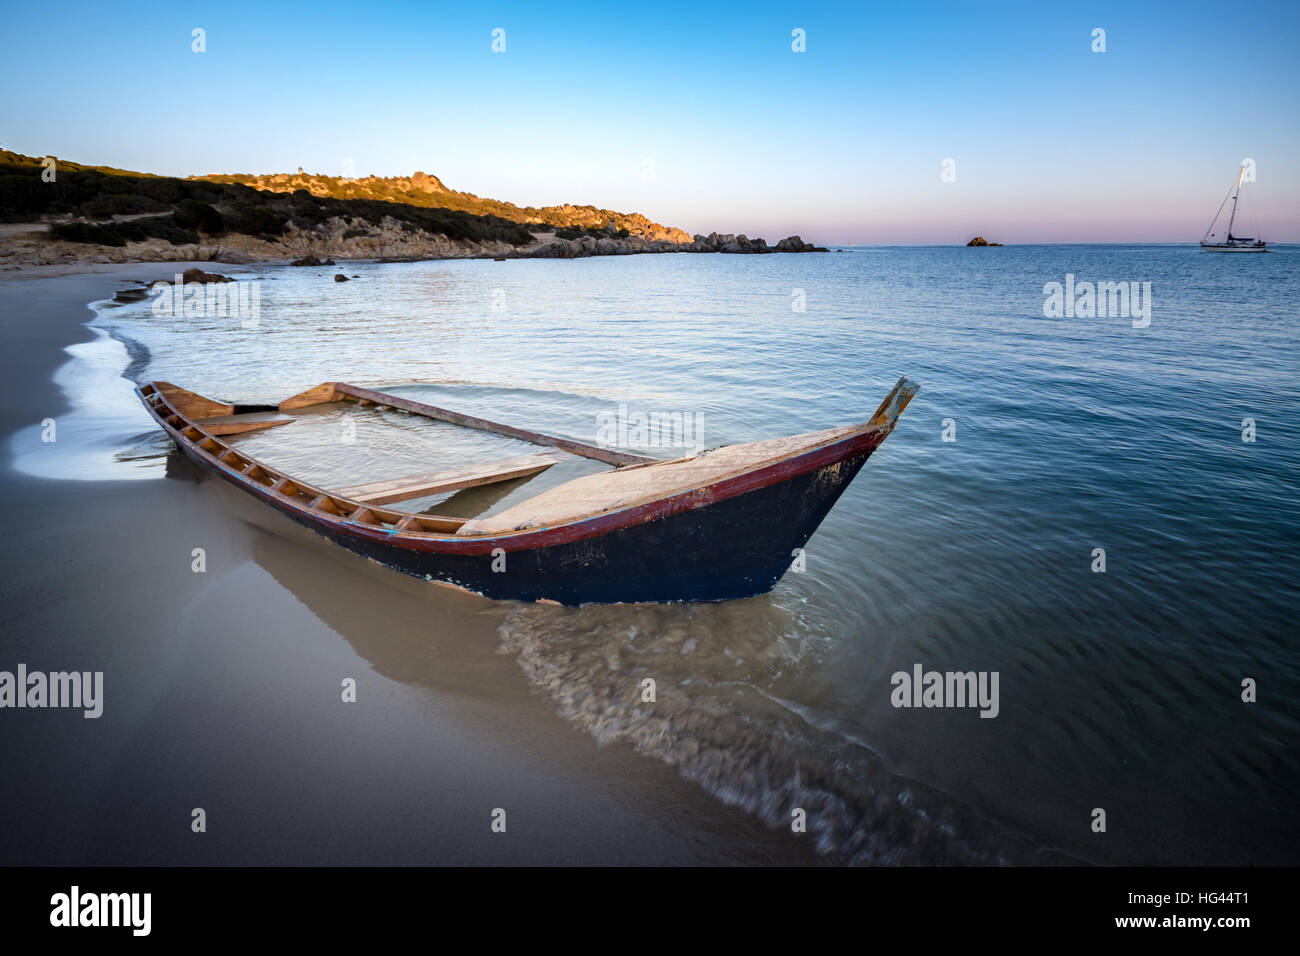 Old wooden boat wrecked on a sandy beach. Stock Photo